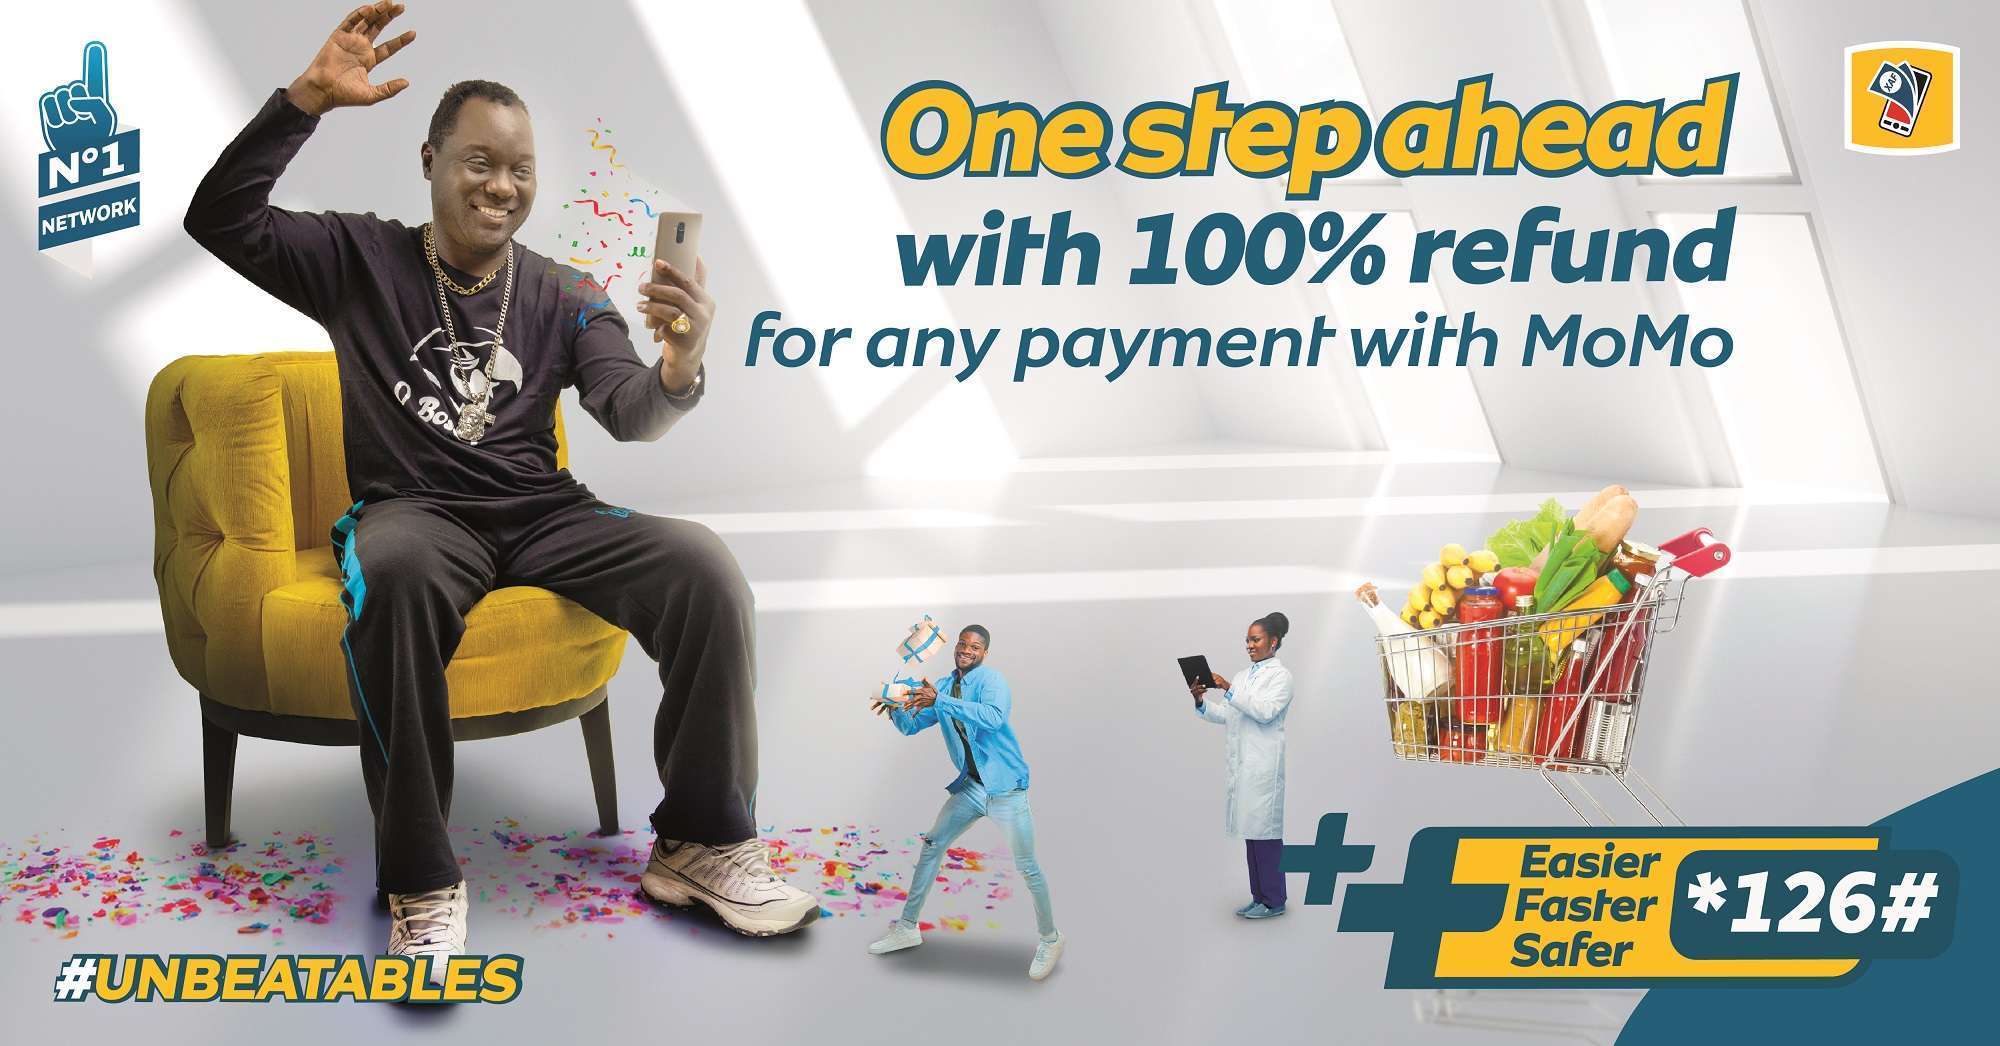 MTN customers receive a 100% refund for all payments via MoMo